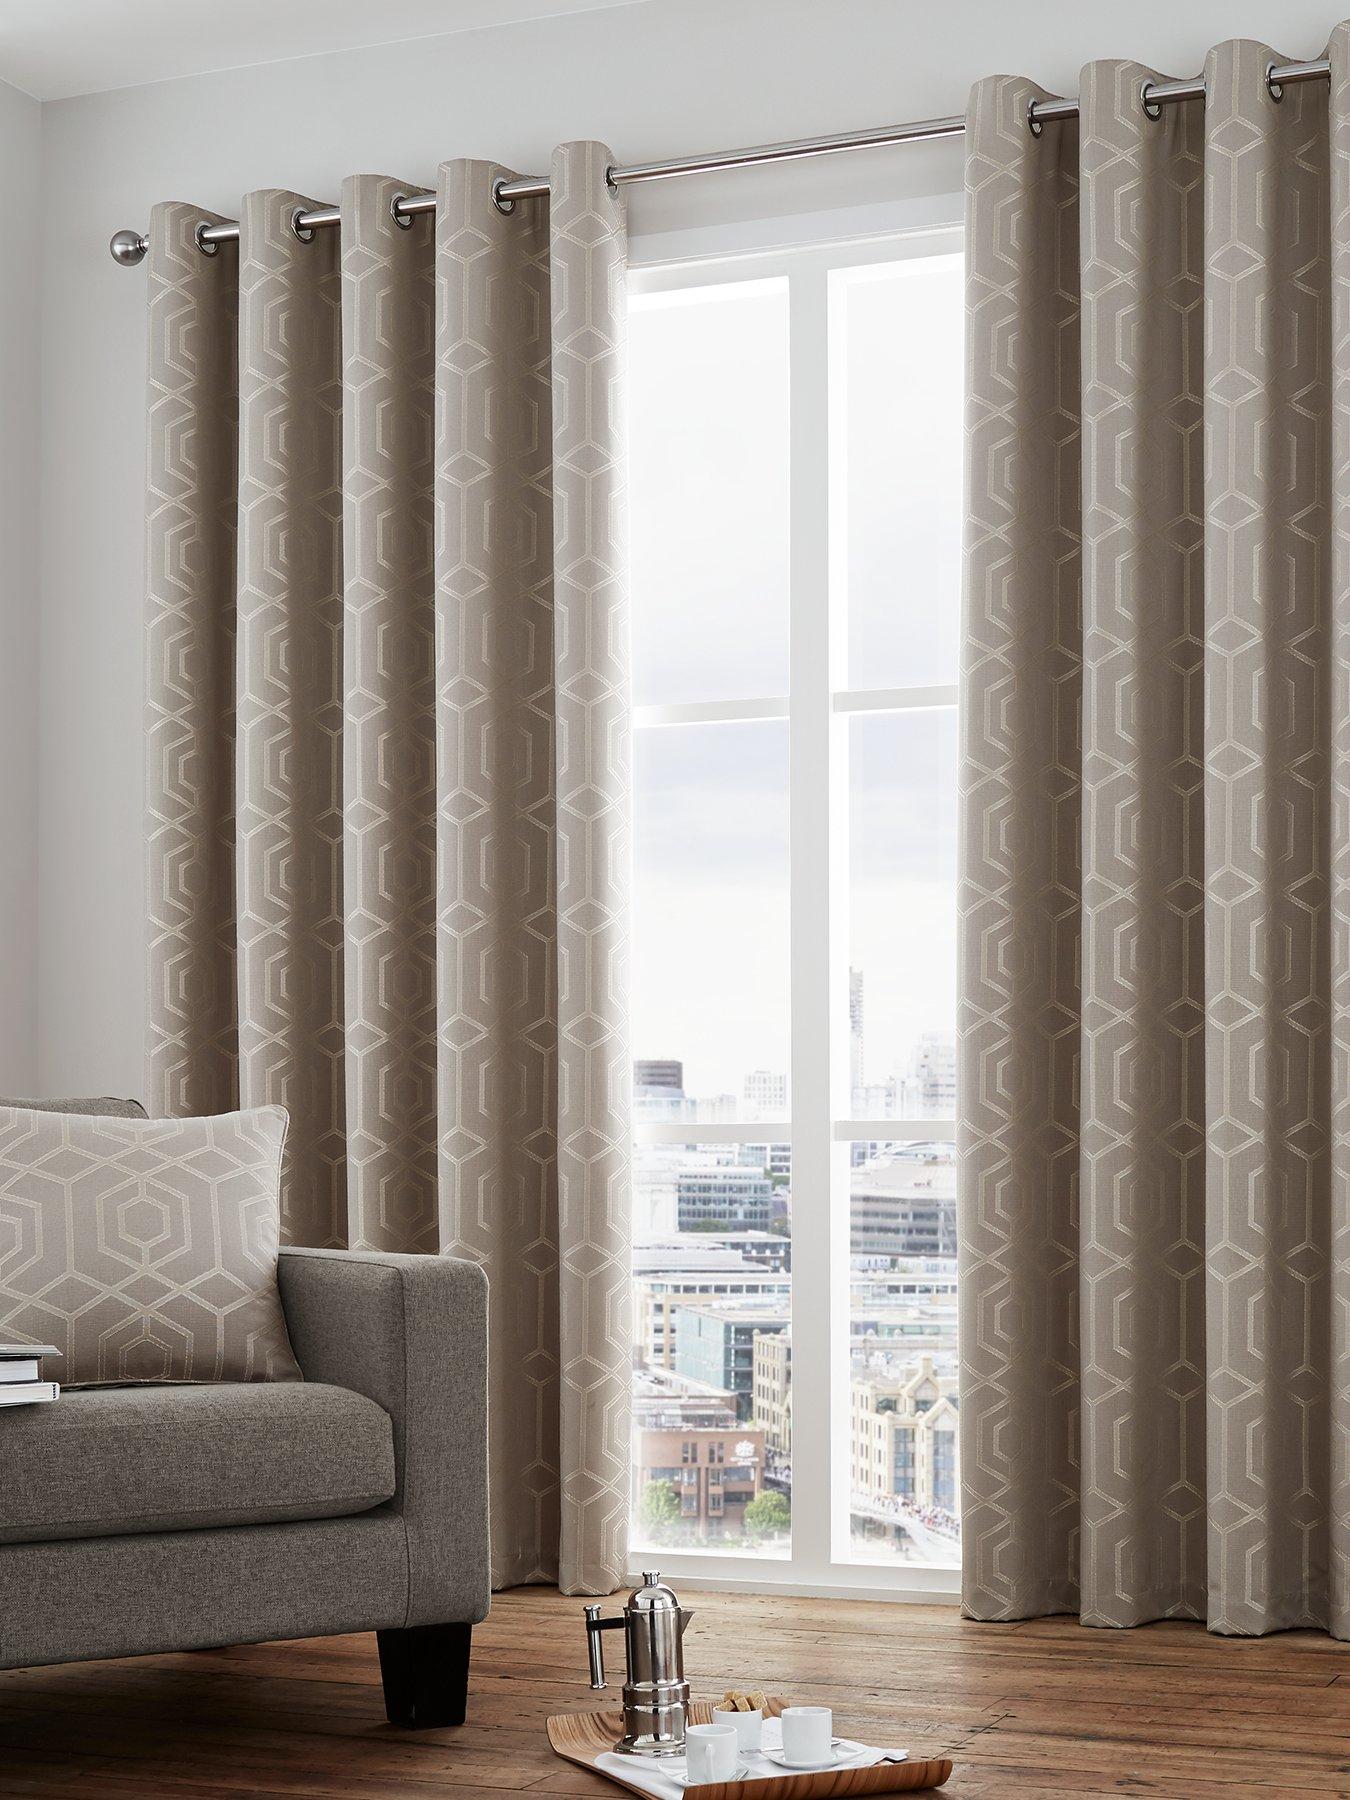 JACQUARD CHECK LATTE BEIGE LINED RING TOP EYELET CURTAINS DRAPES *6 SIZES* 